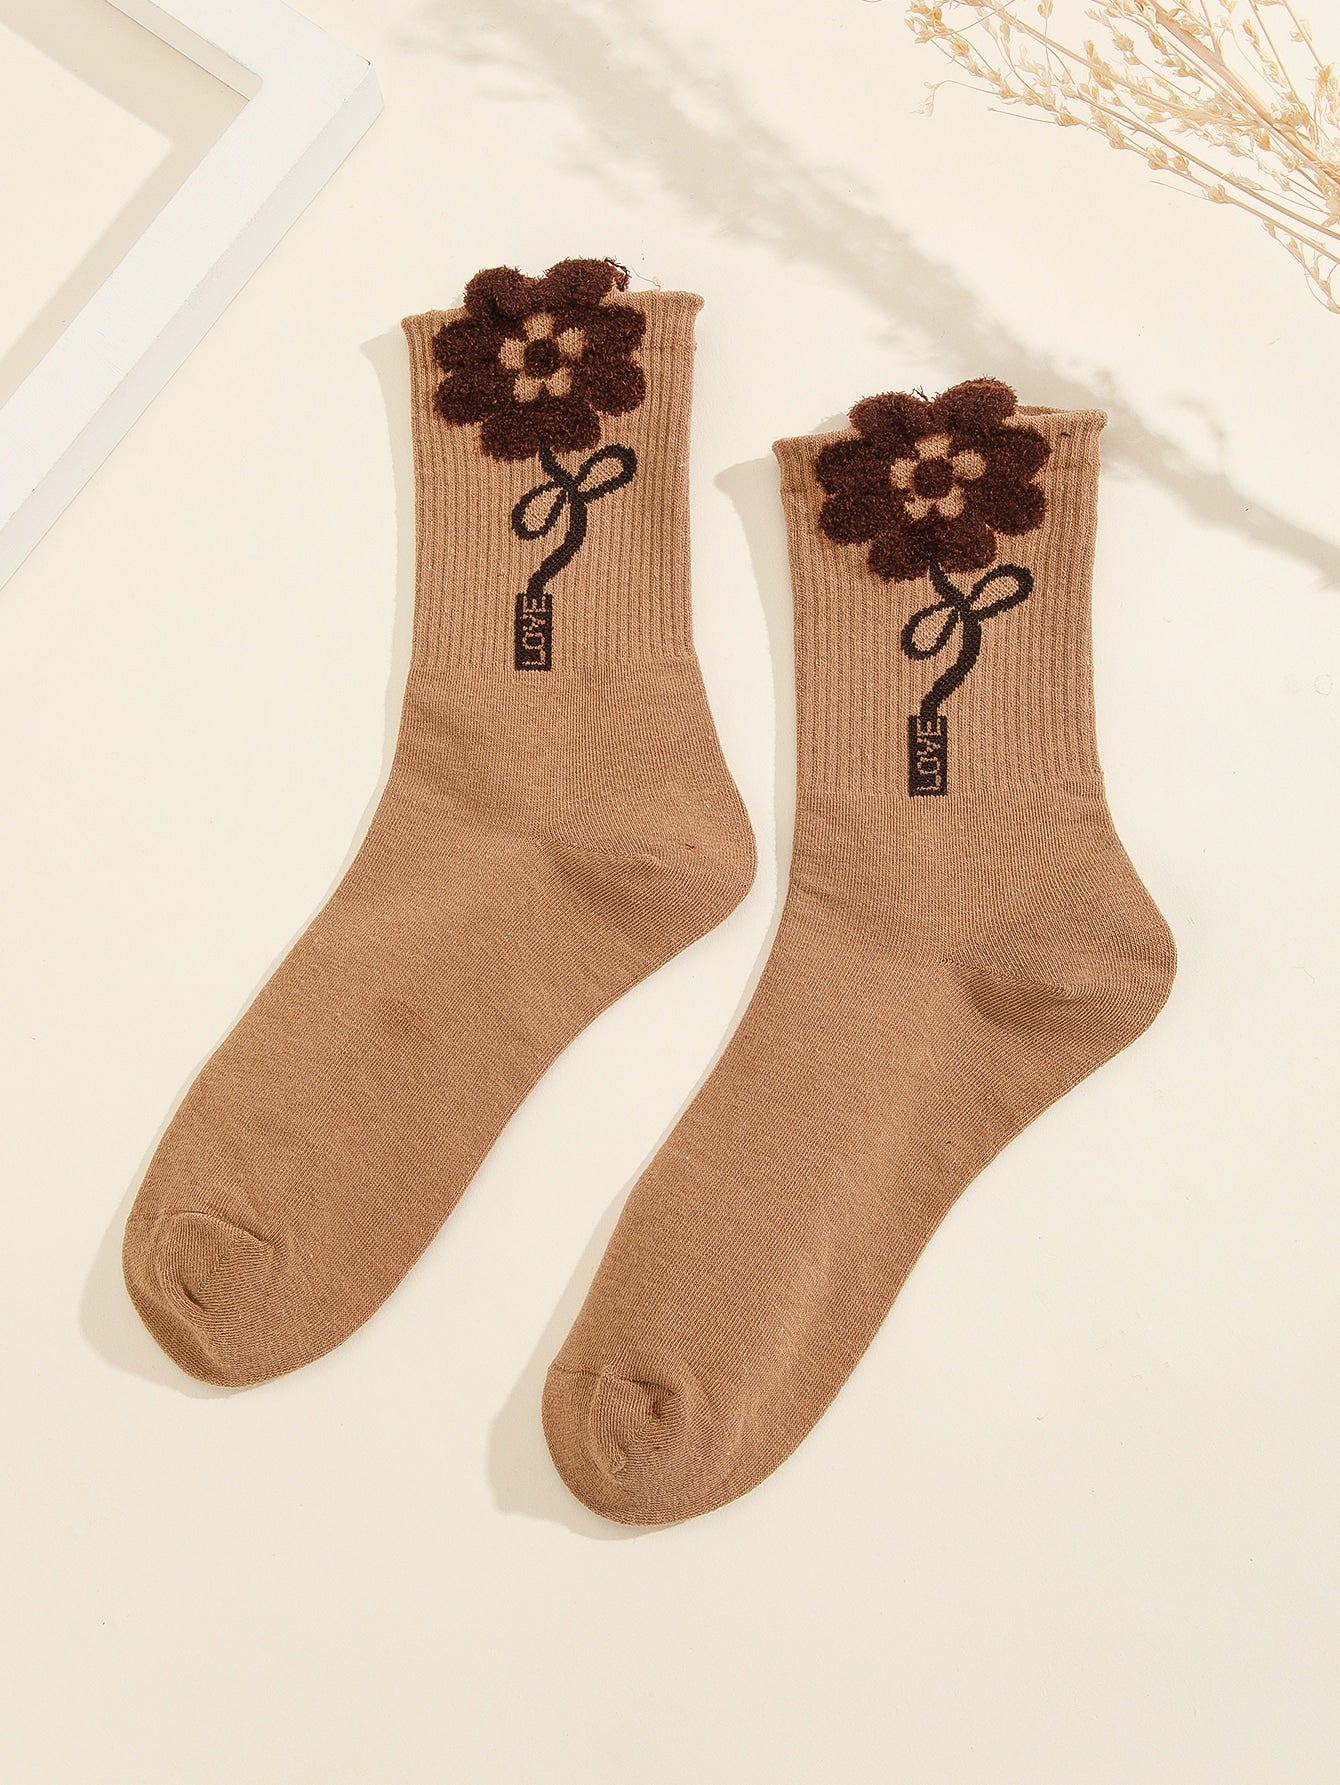 Floral & Letter Graphic Crew Socks